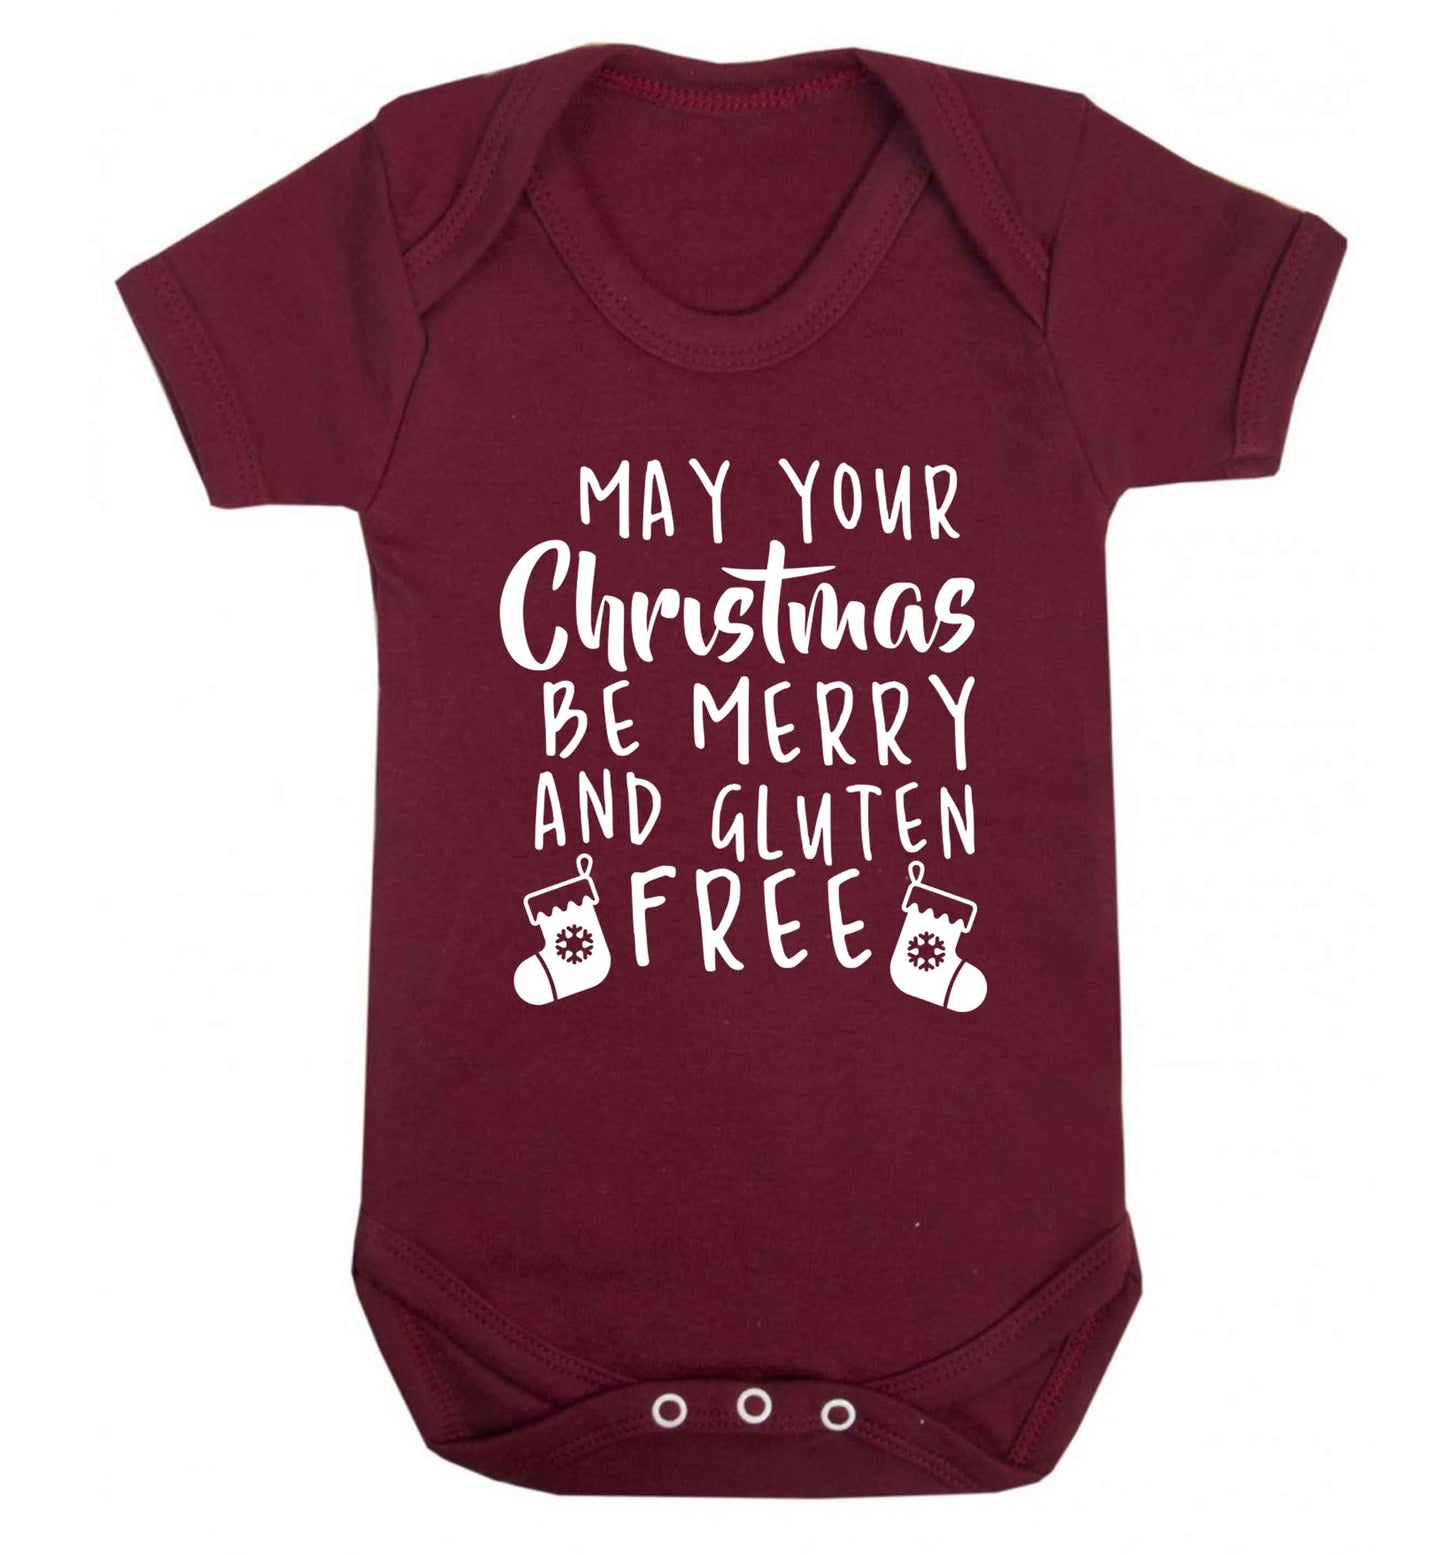 May your Christmas be merry and gluten free Baby Vest maroon 18-24 months